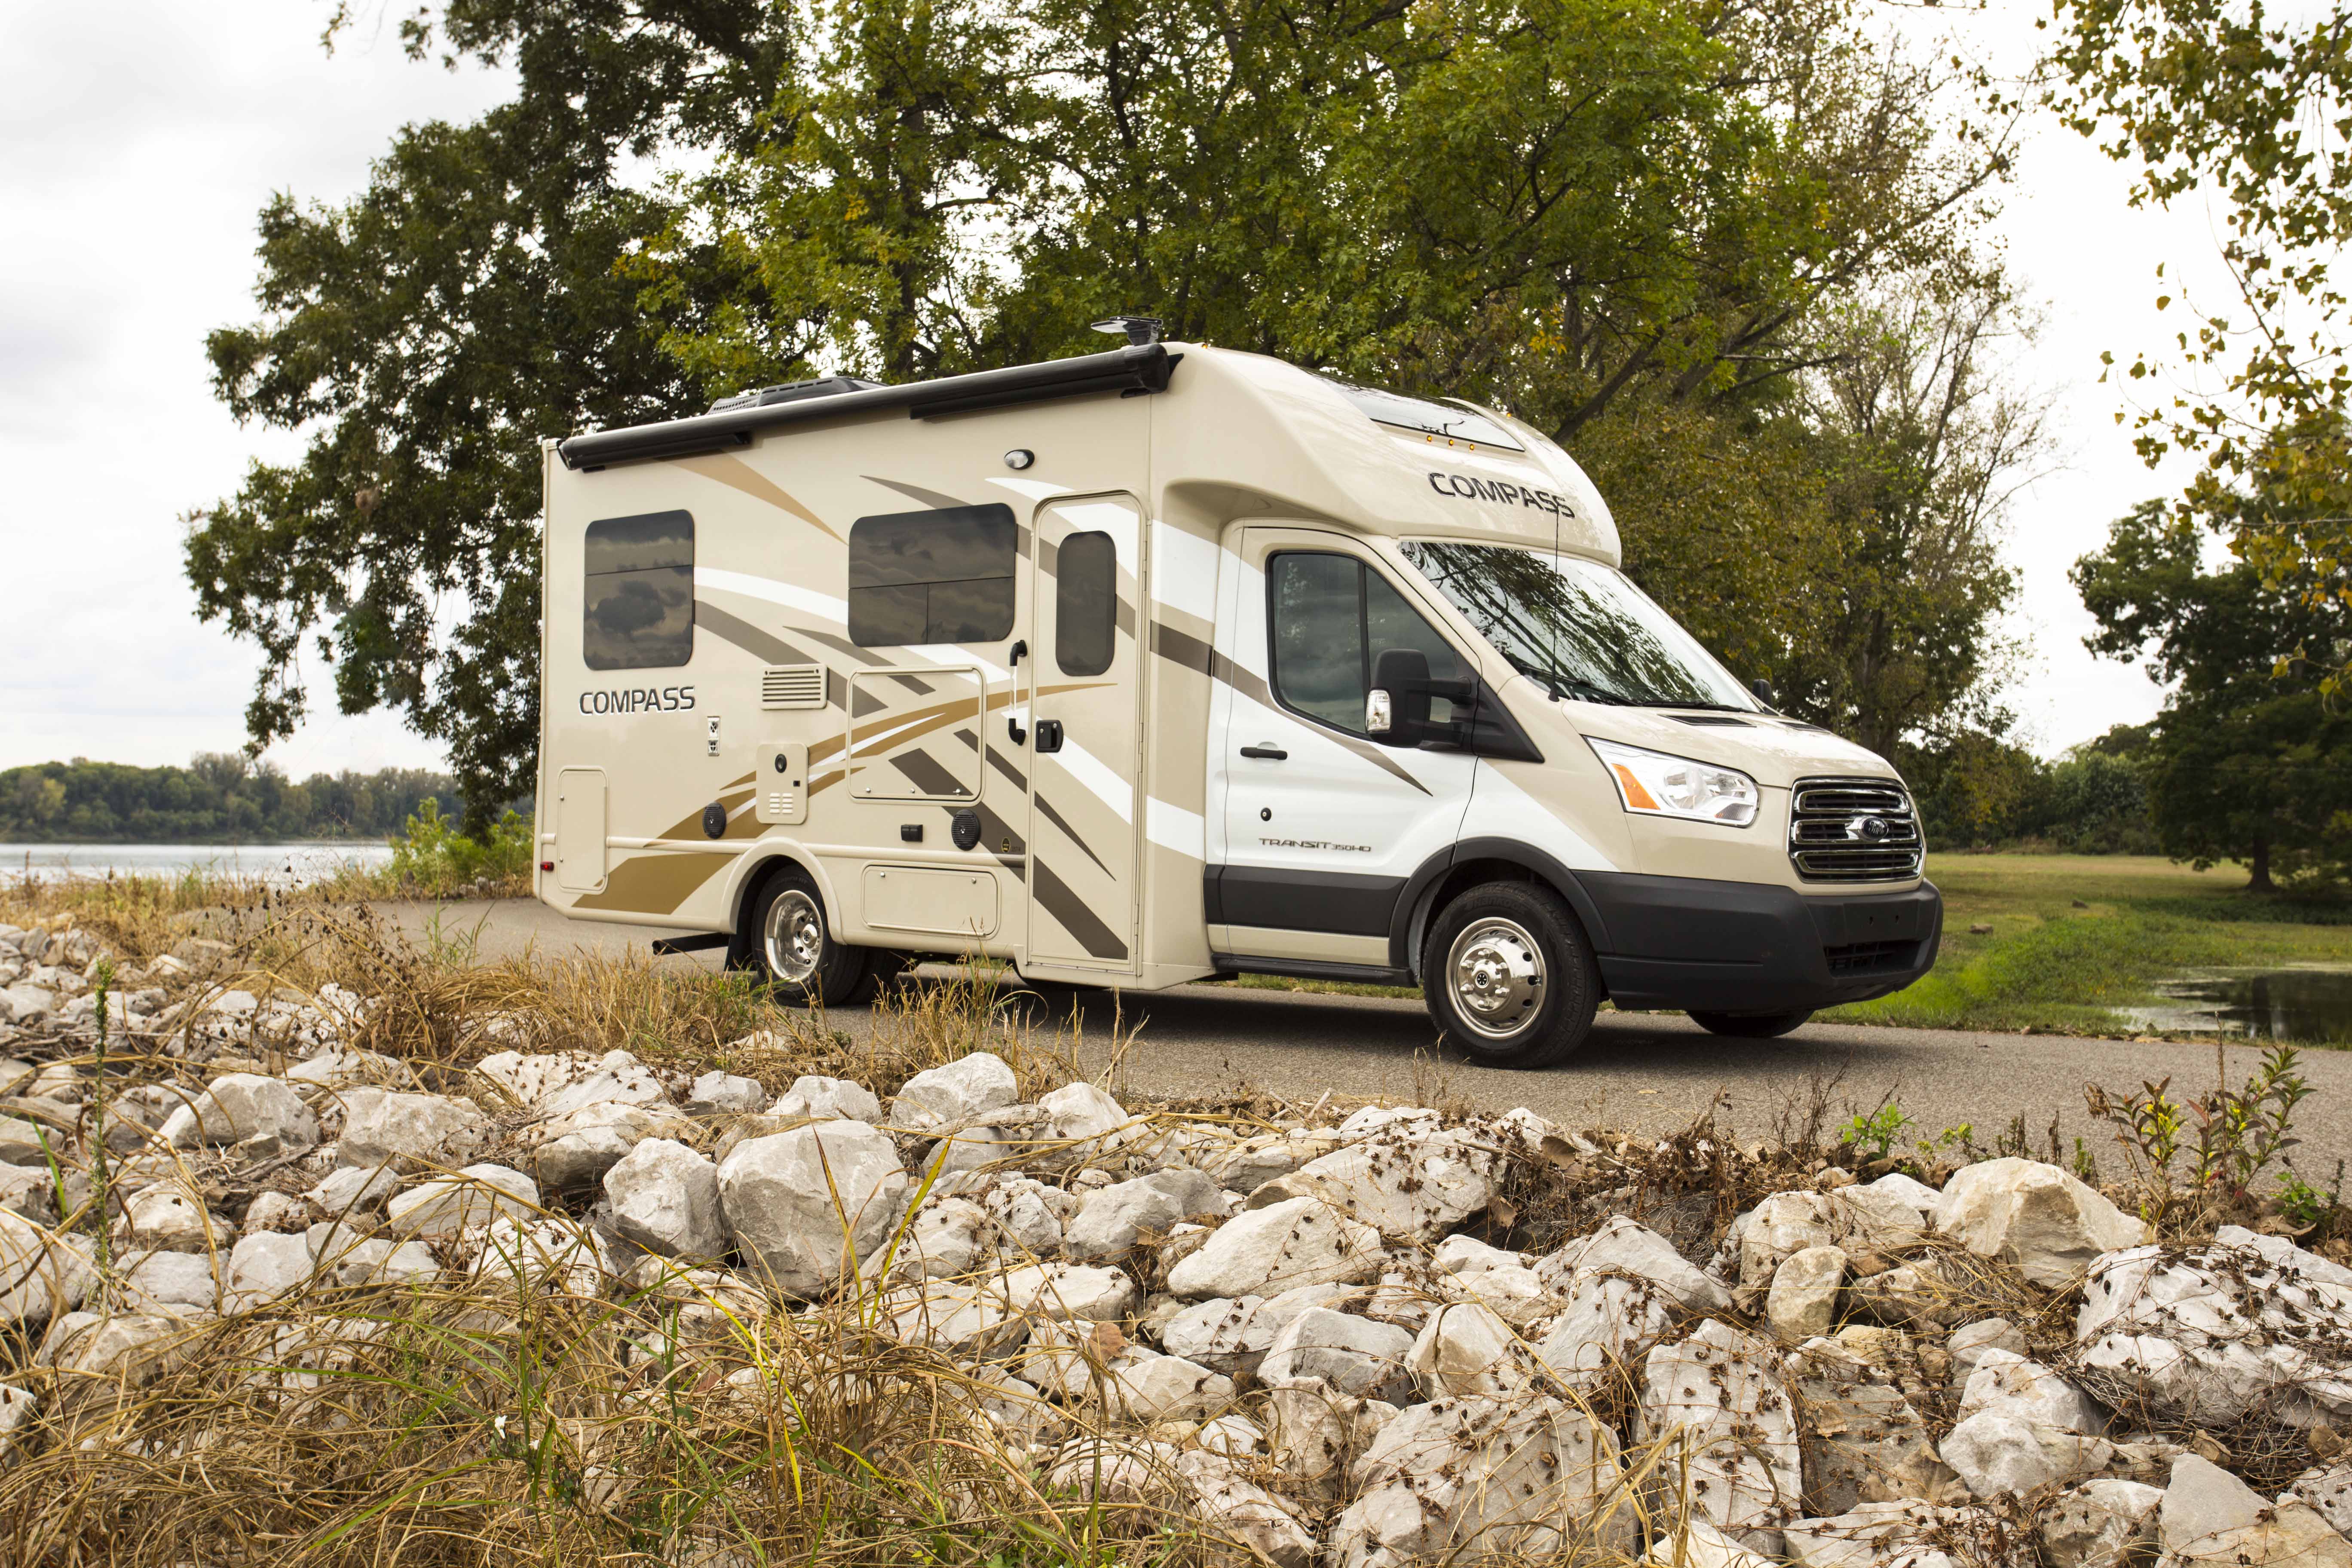 Does the Ford Transit Camper have generally good reviews?